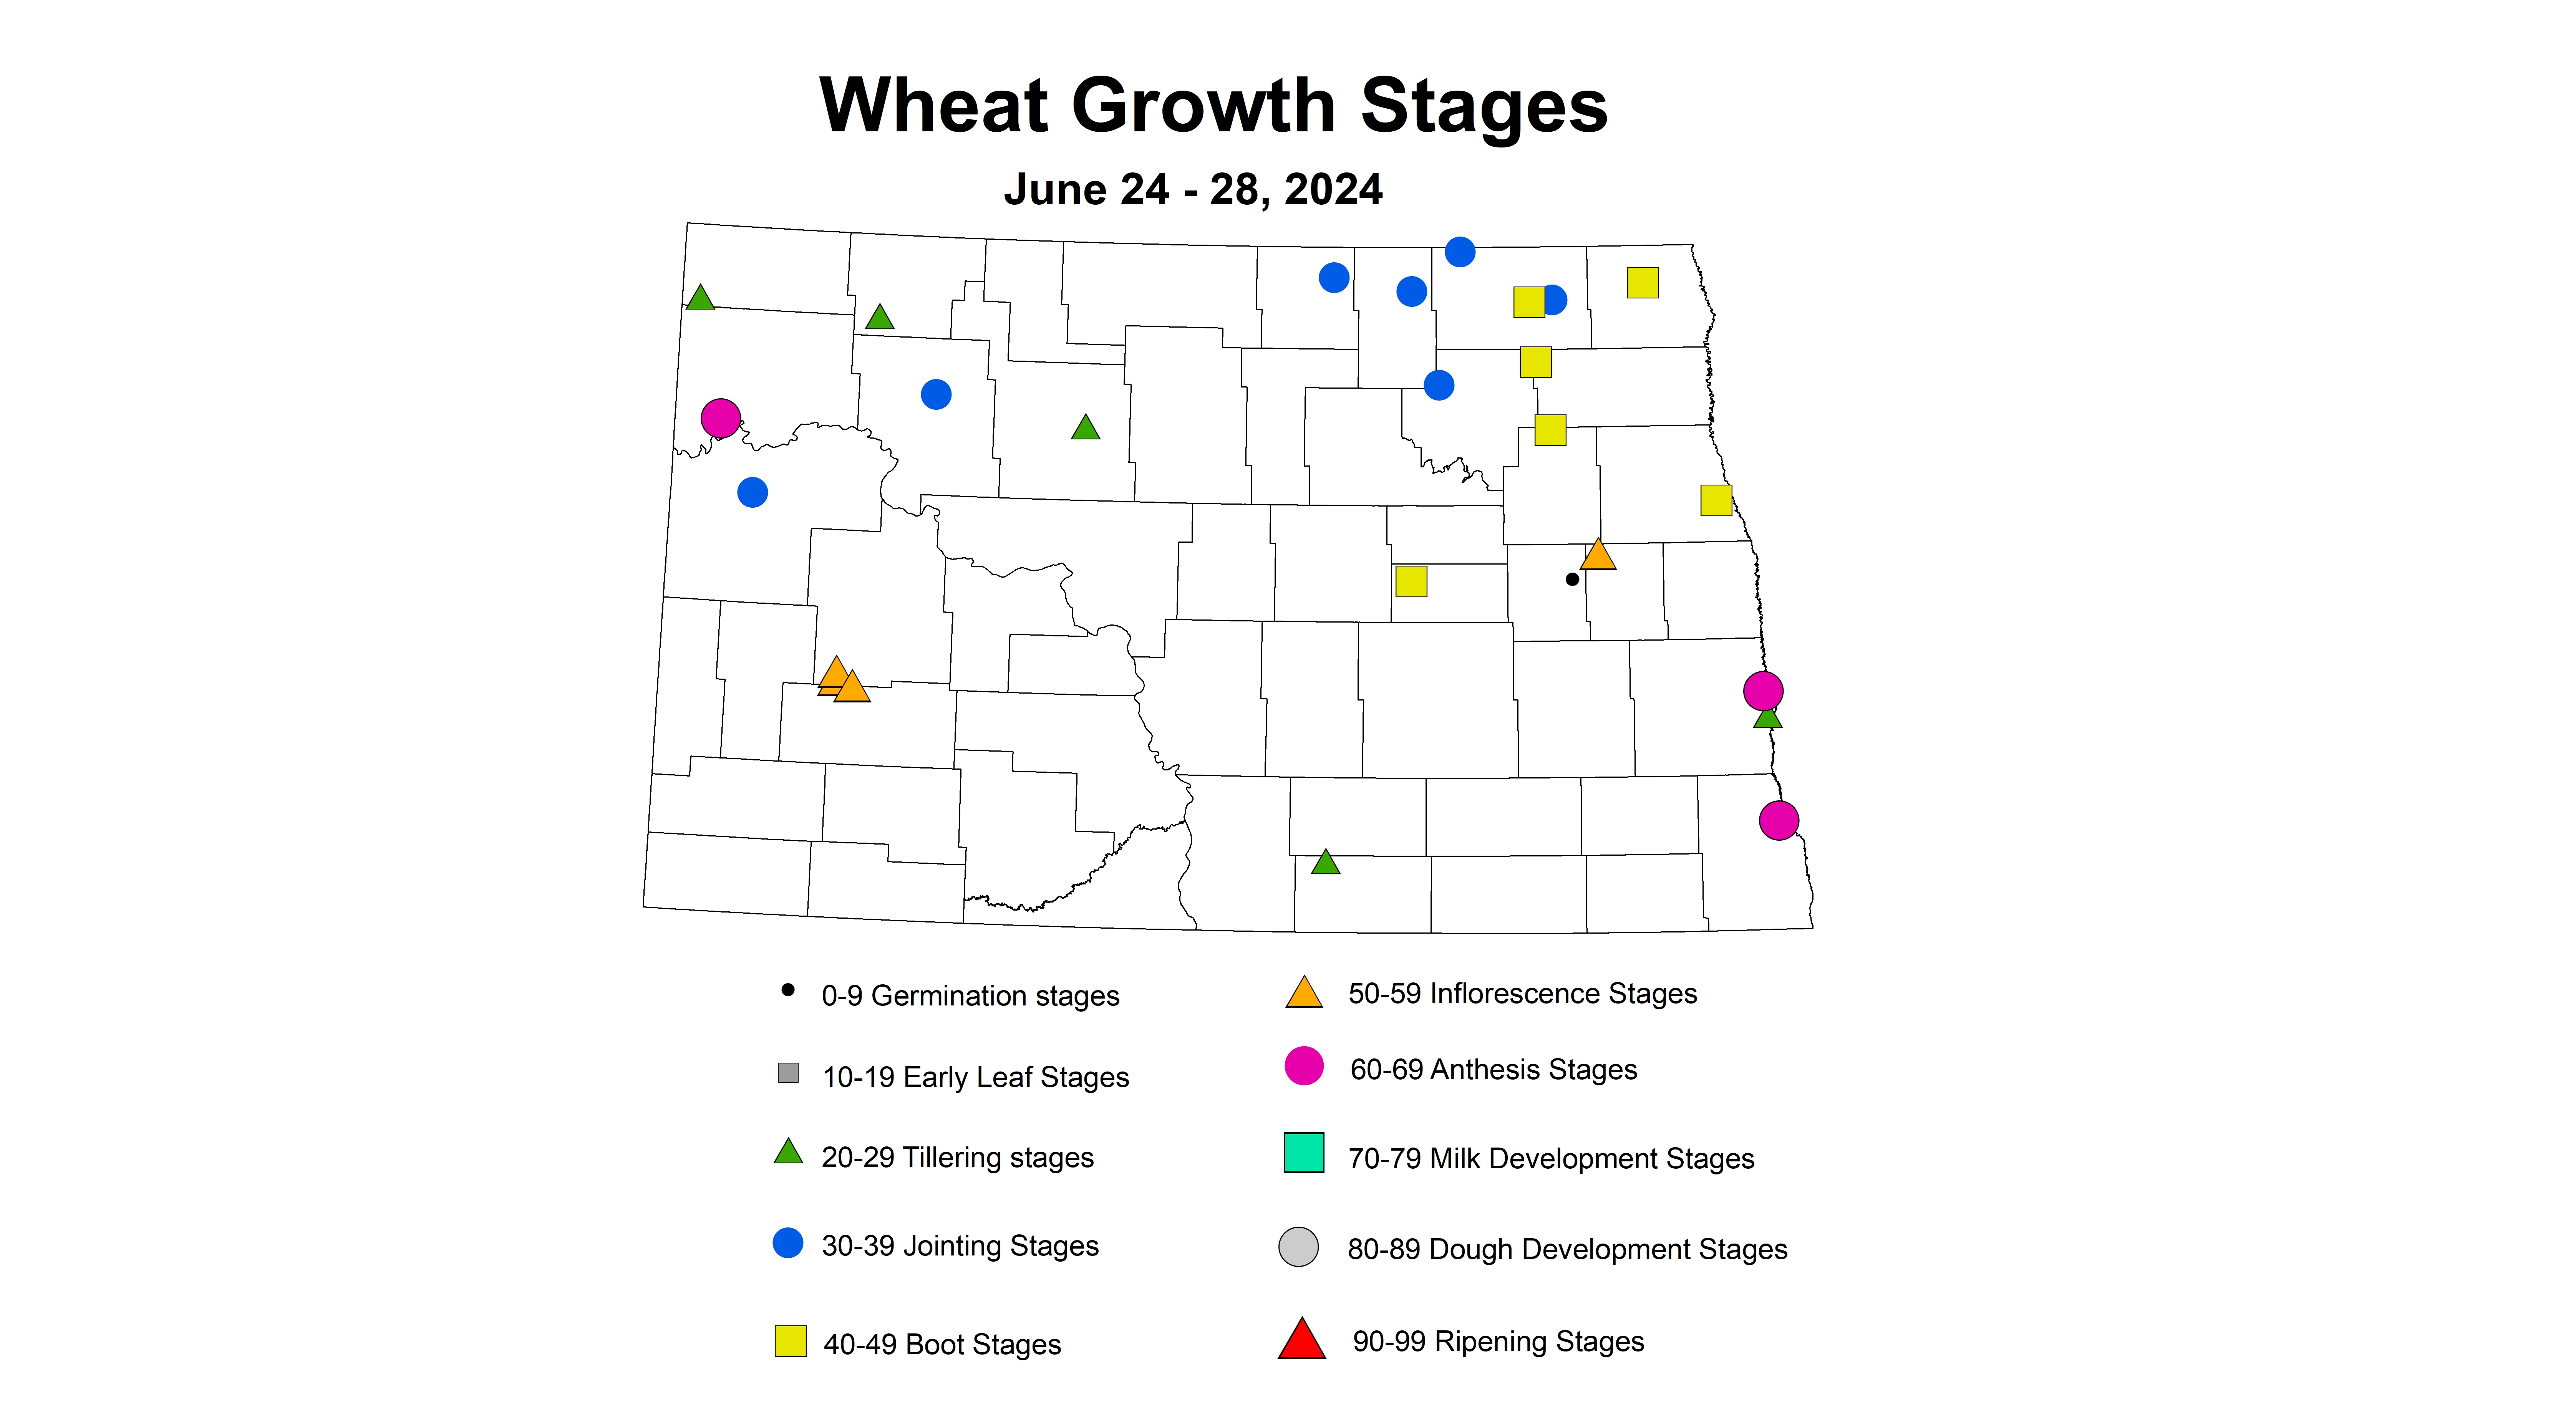 wheat growth stages 6.24-6.28 2024